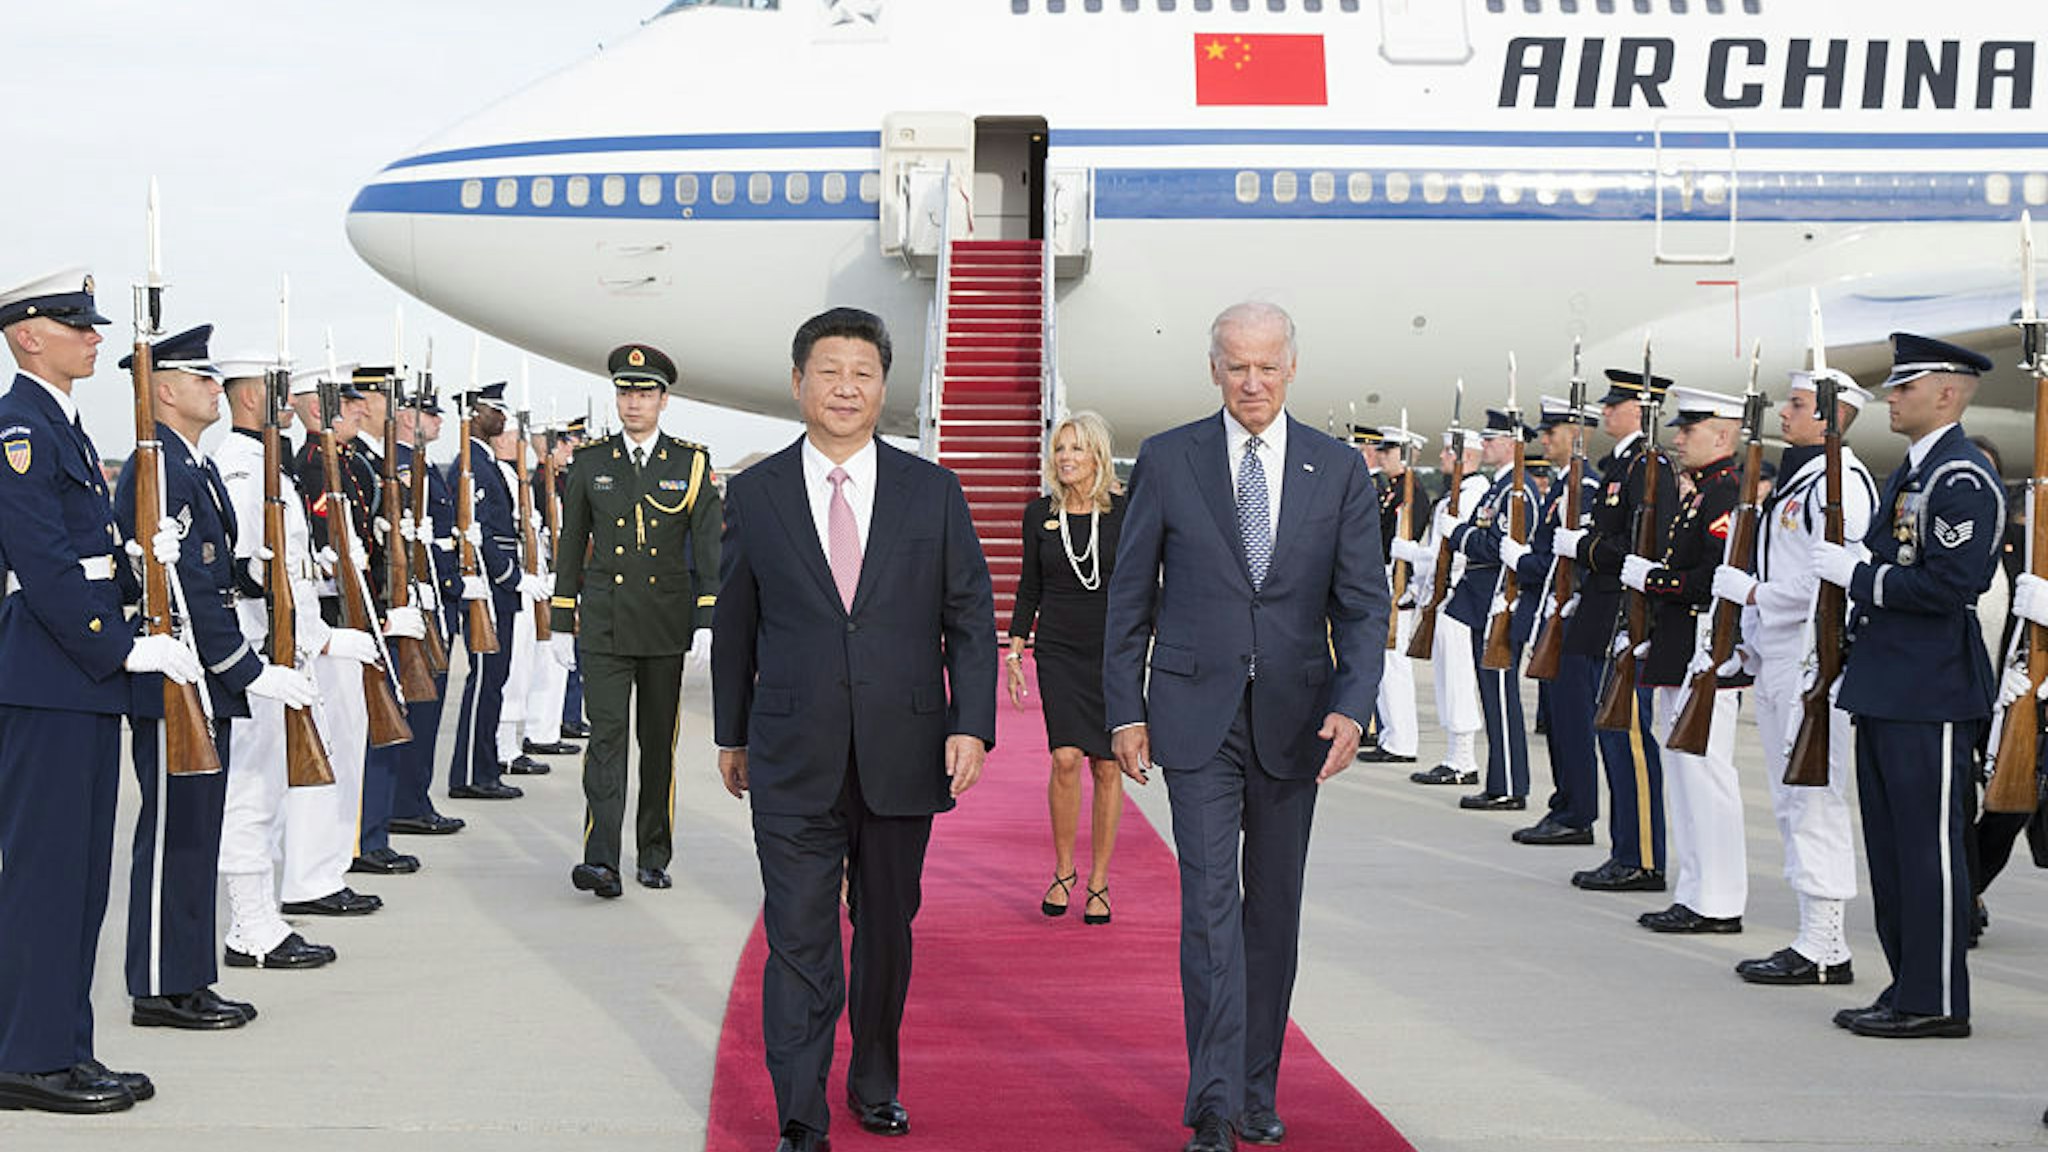 Chinese President Xi Jinping and his wife Peng Liyuan are welcomed by U.S. Vice President Joe Biden and his wife at Andrews Air Force Base in Washington D.C., the United States, Sept. 24, 2015. Xi arrived here Thursday to meet with his U.S. counterpart Barack Obama and other U.S. political leaders as part of his first state visit to the United States.